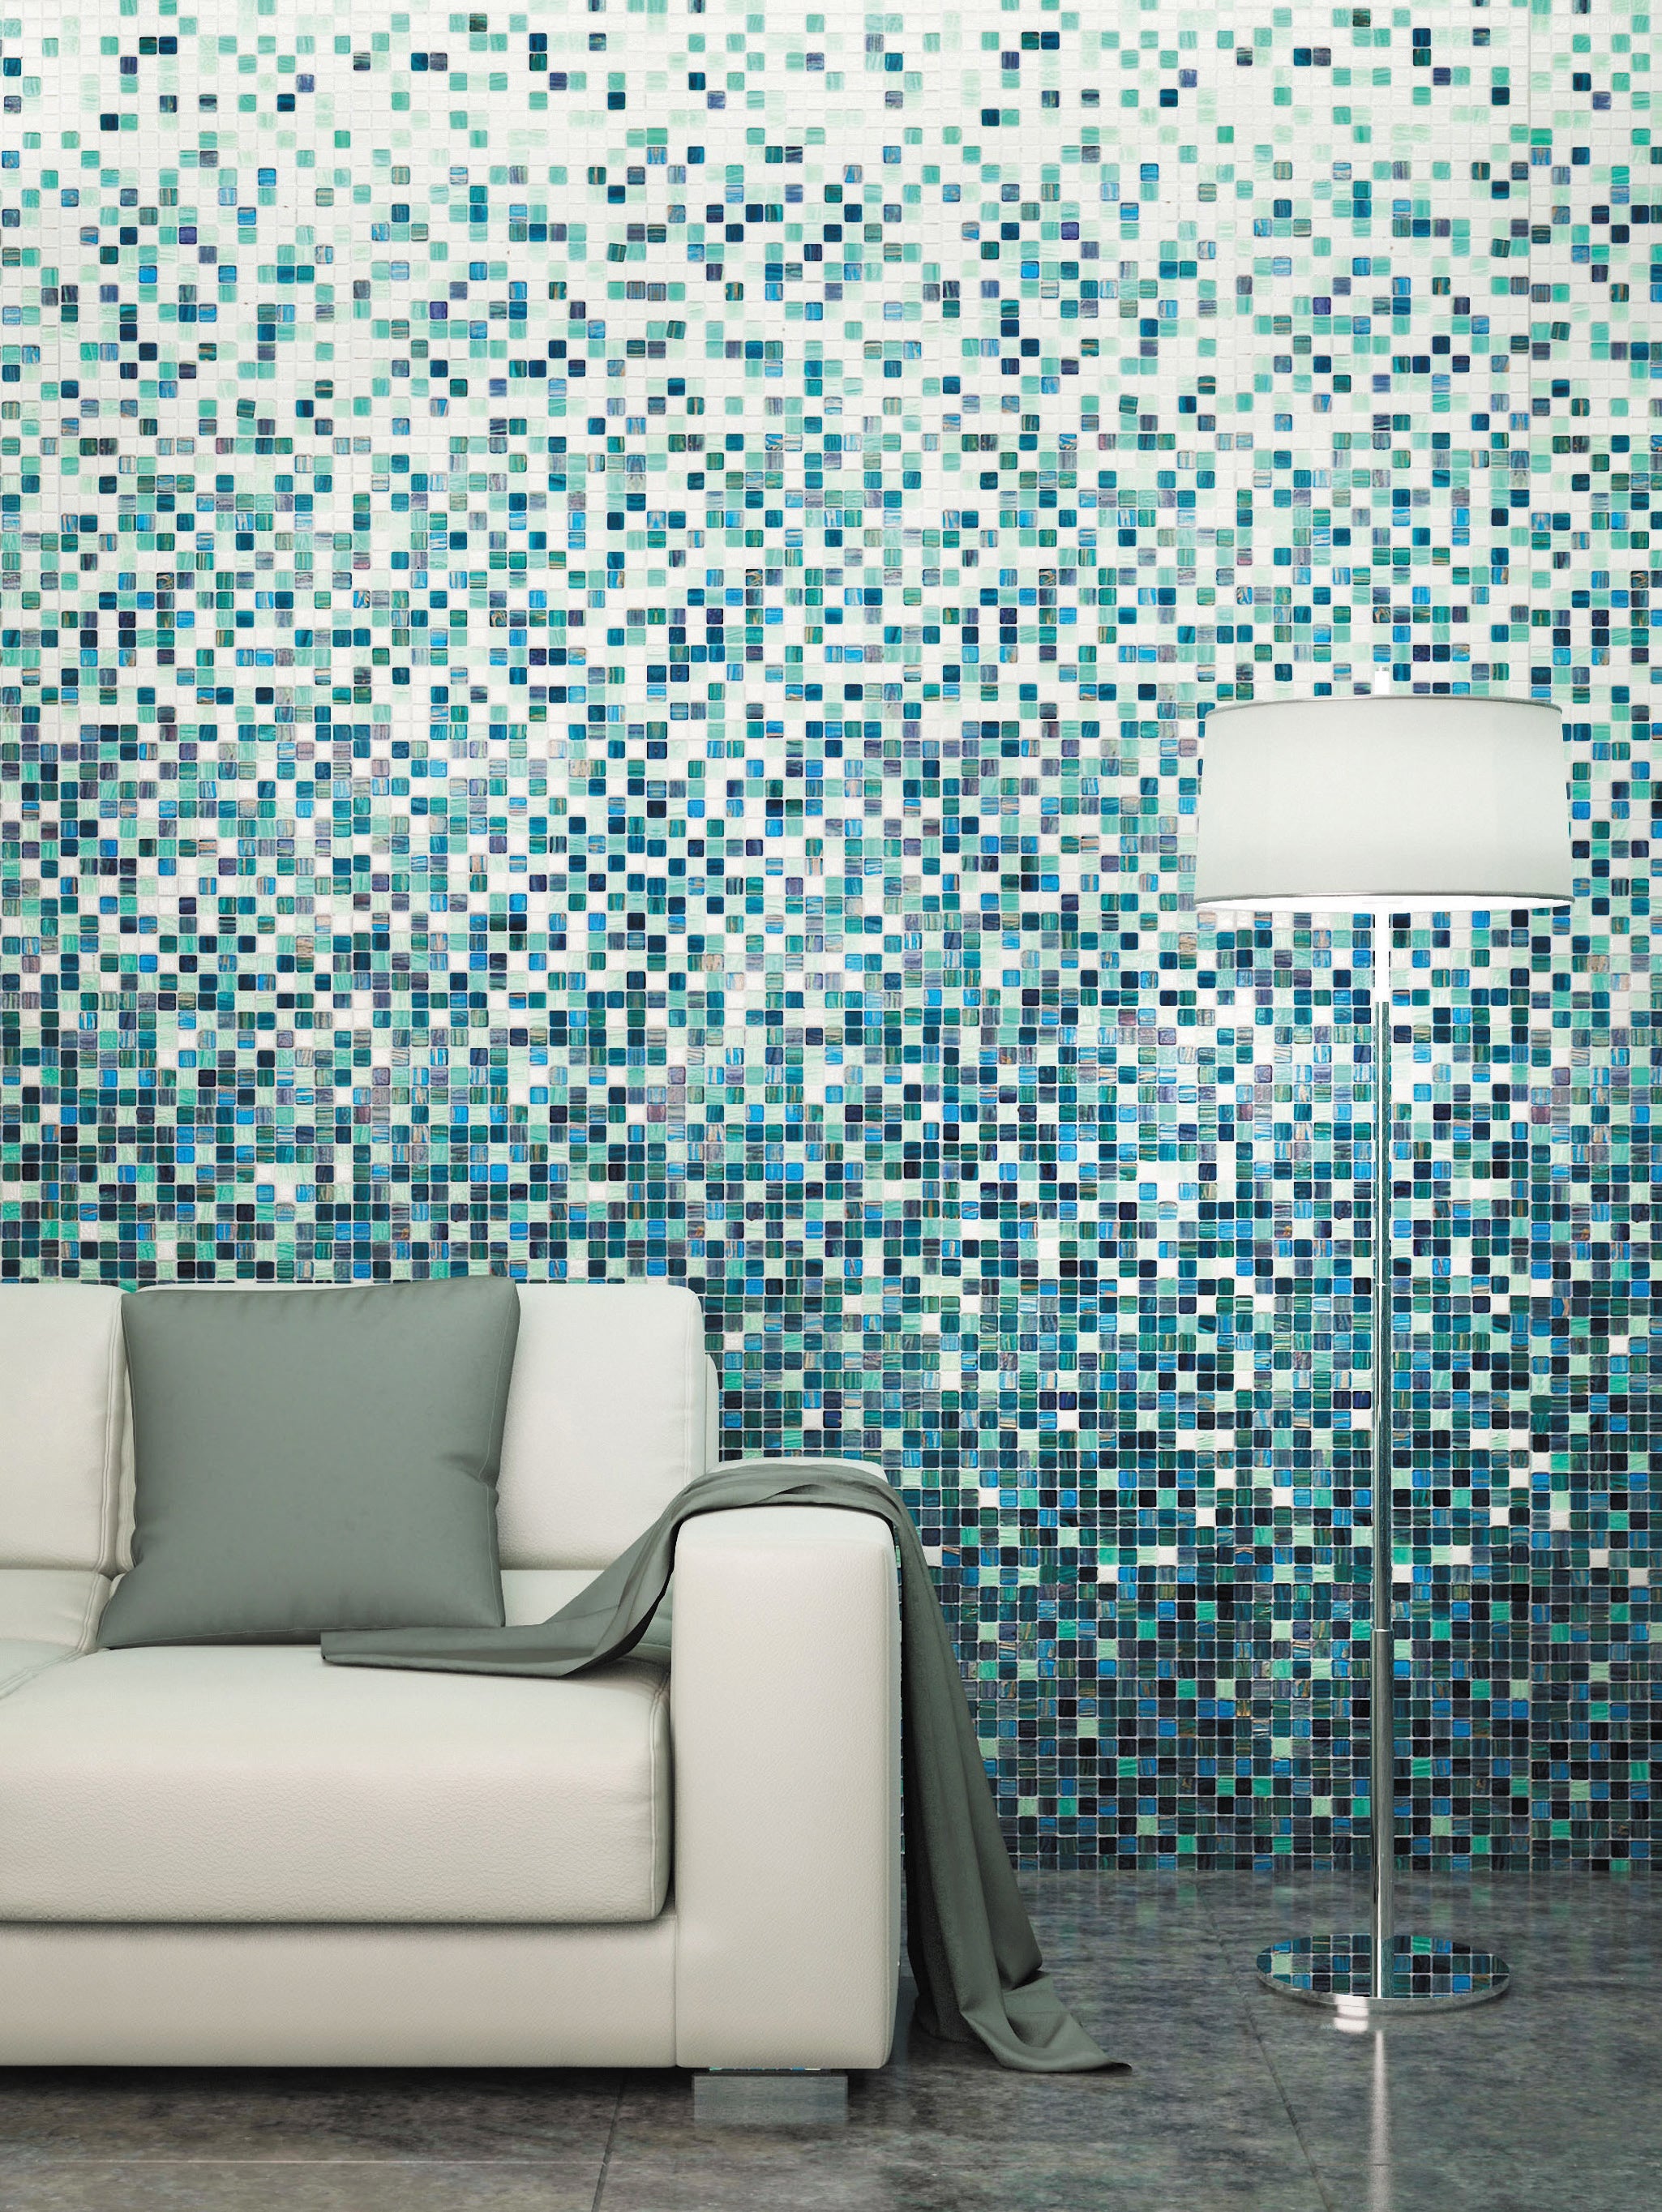 gradients glass mosaic with shades of blue and green in polished finish from surface group international.